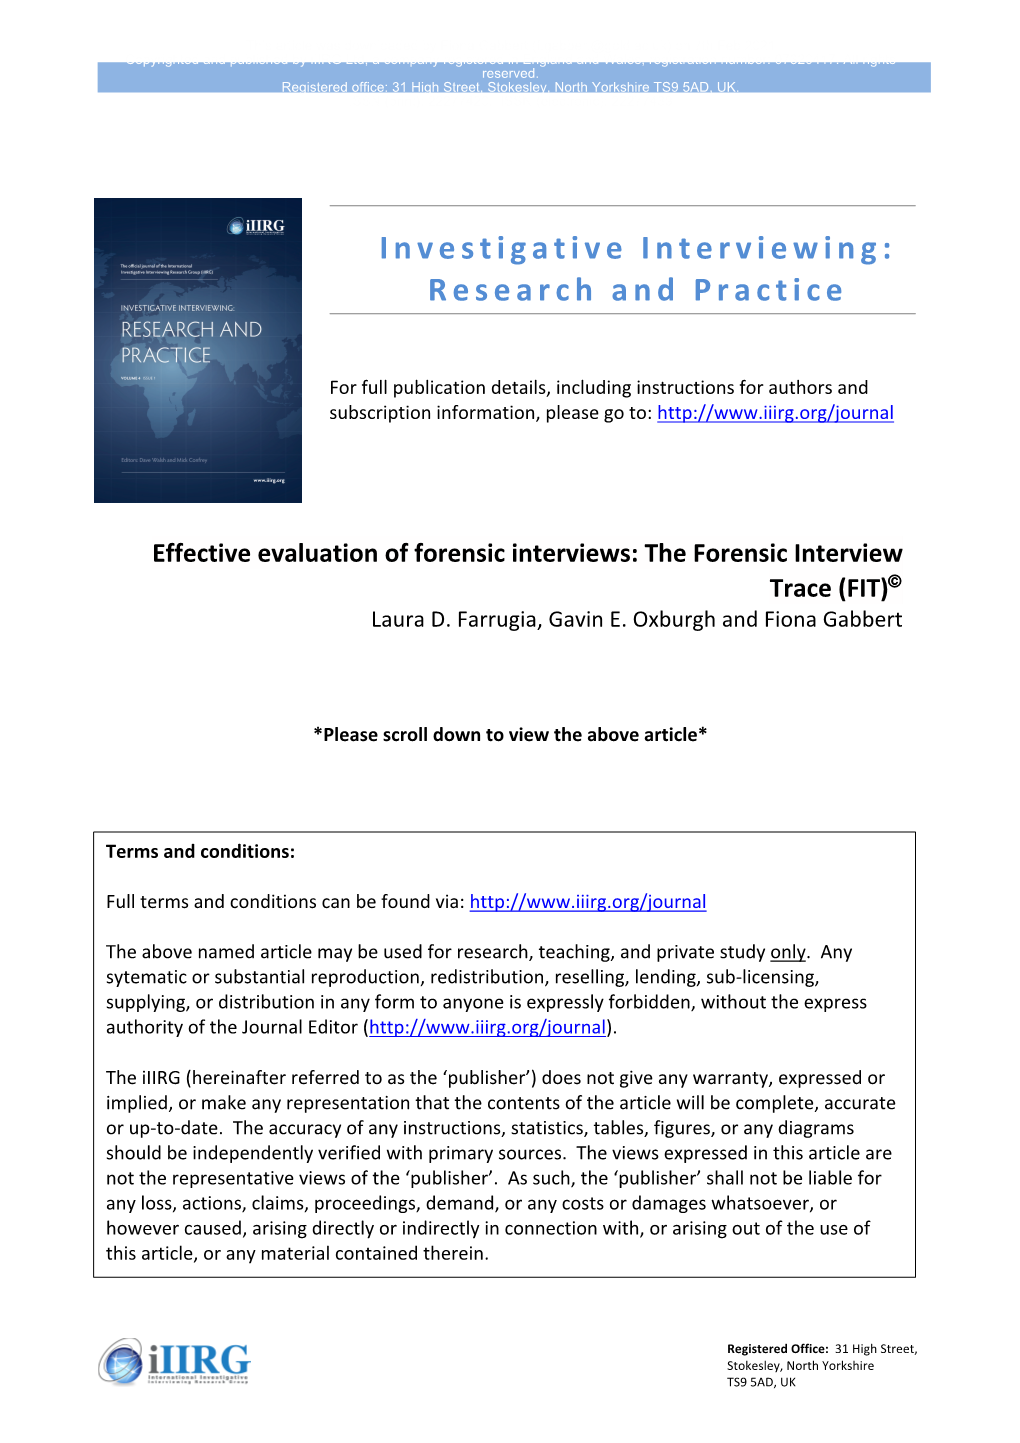 Investigative Interviewing: Research and Practice